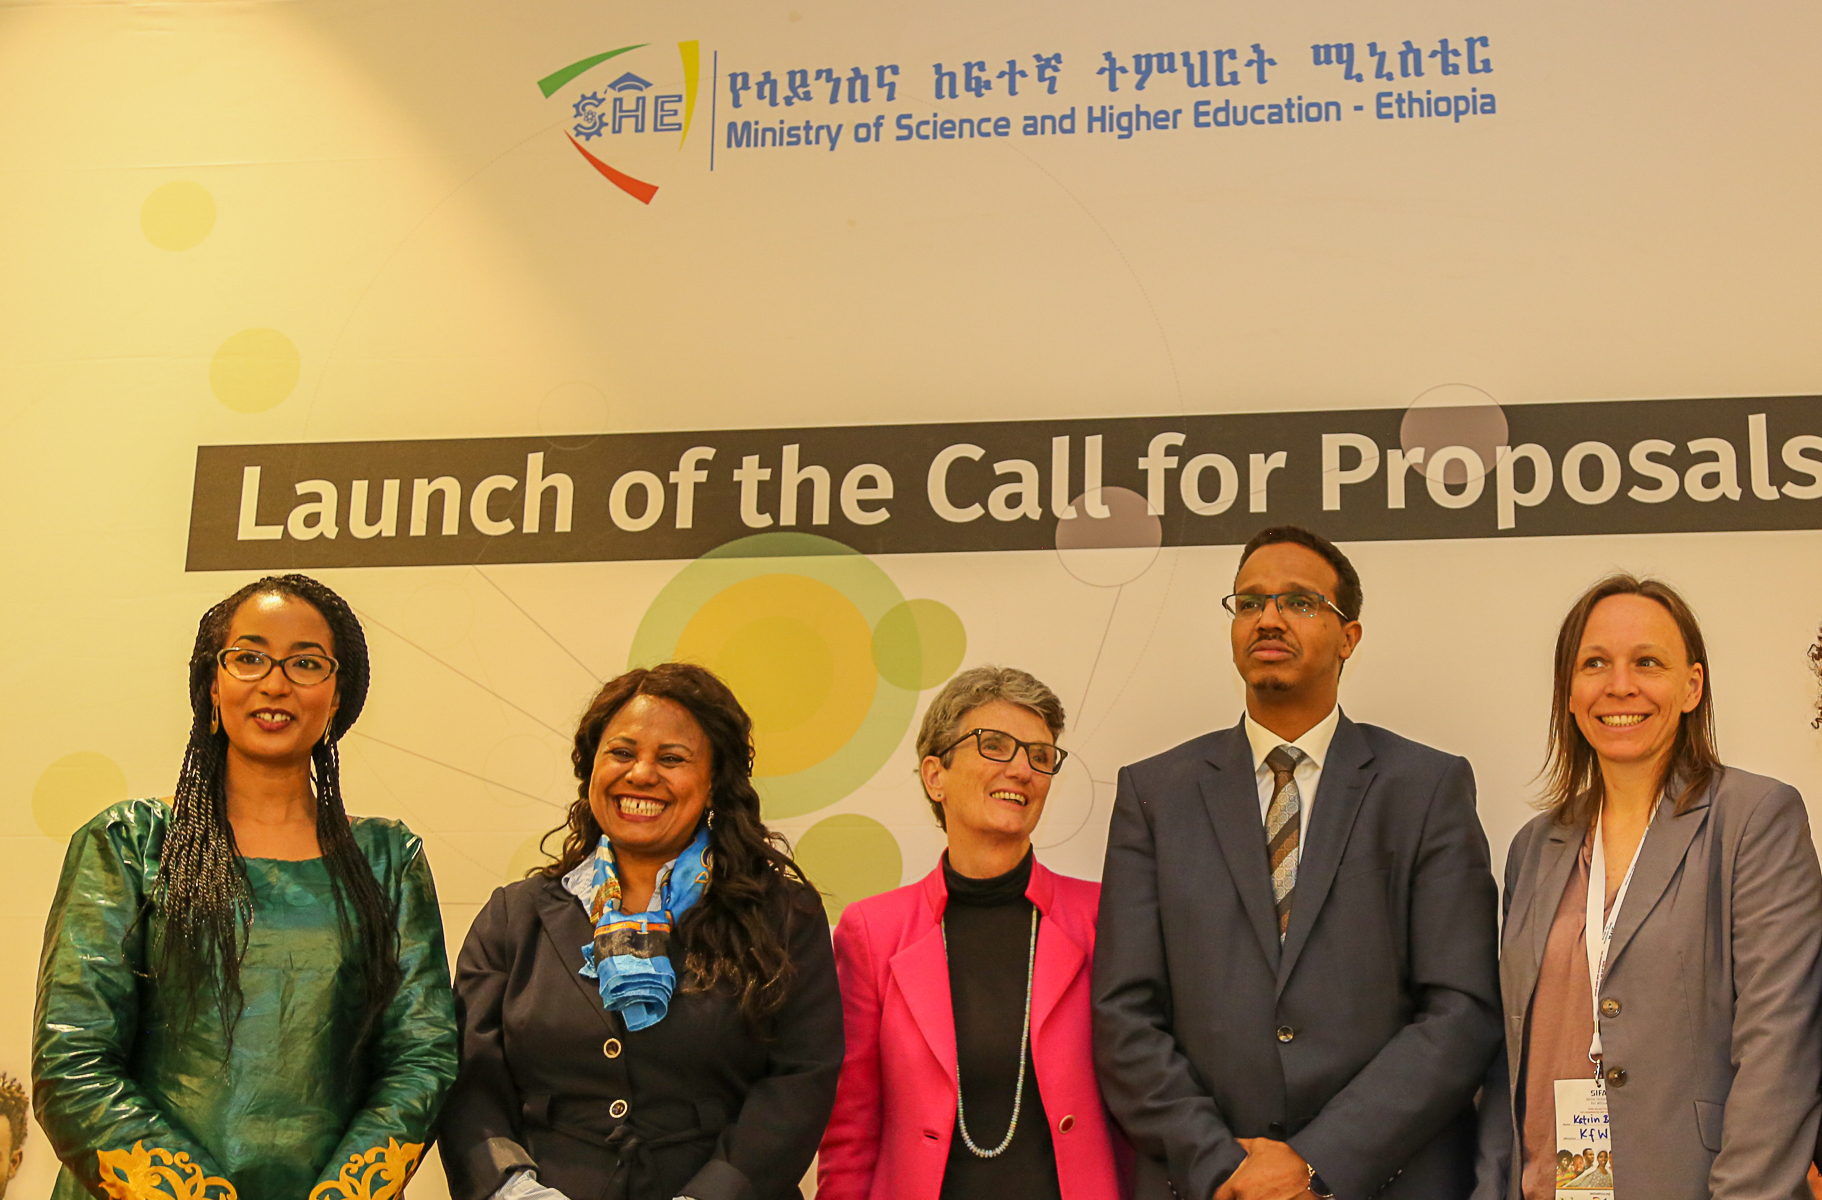 Ethiopia: Photos of the launch from 10/07/2019 in Addis Ababa